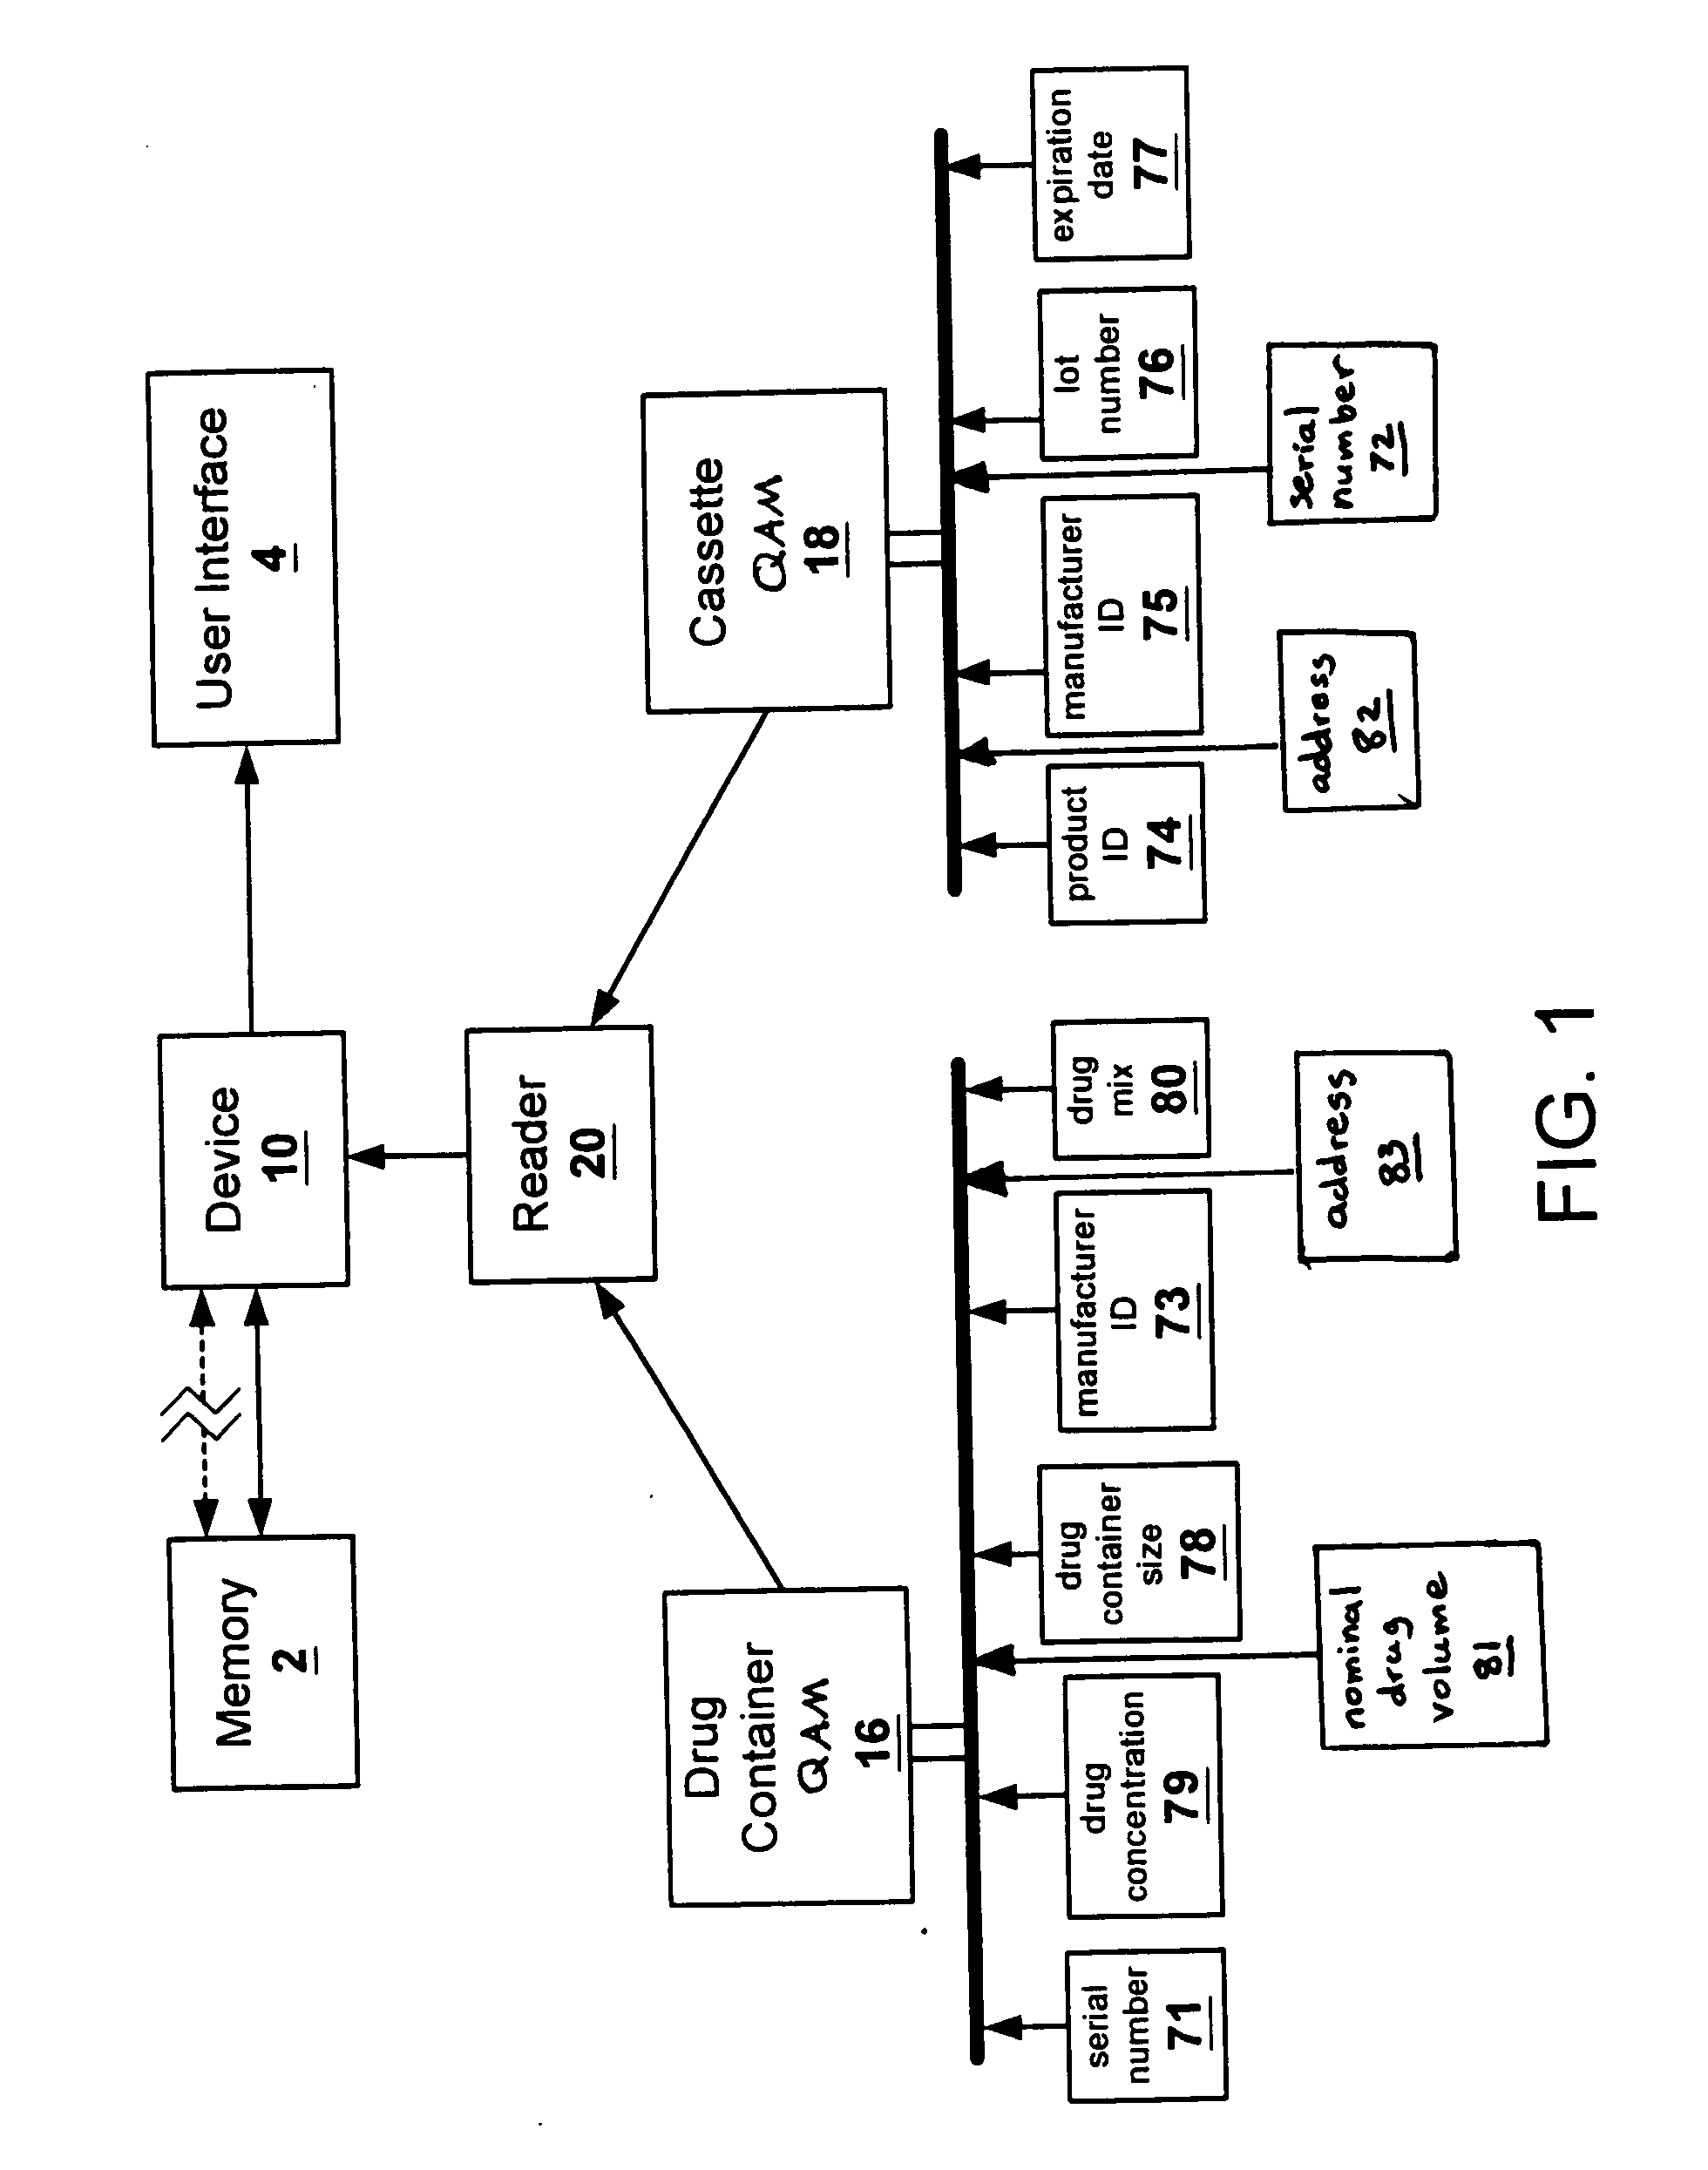 Methods and apparatuses for assuring quality and safety of drug administration and medical products and kits